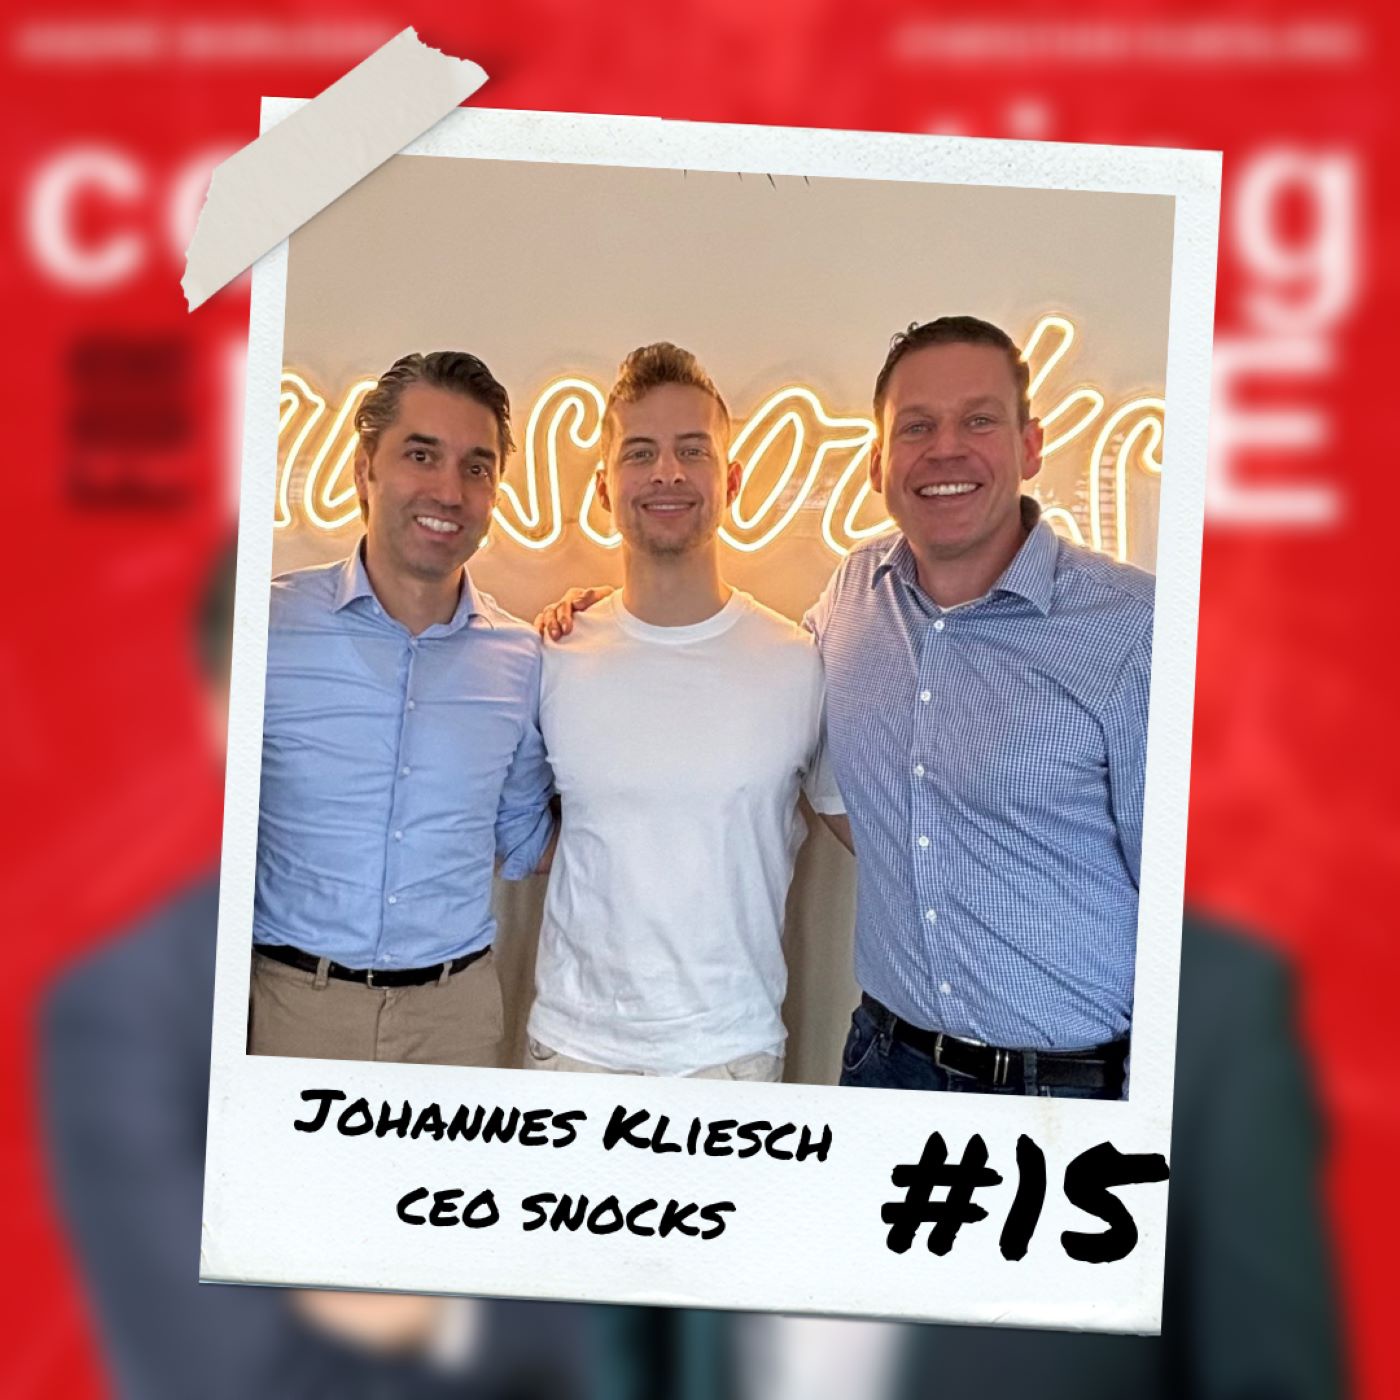 #15 People, growth mindset & how to scale any business with Johannes Kliesch, co-founder and CEO of Snocks